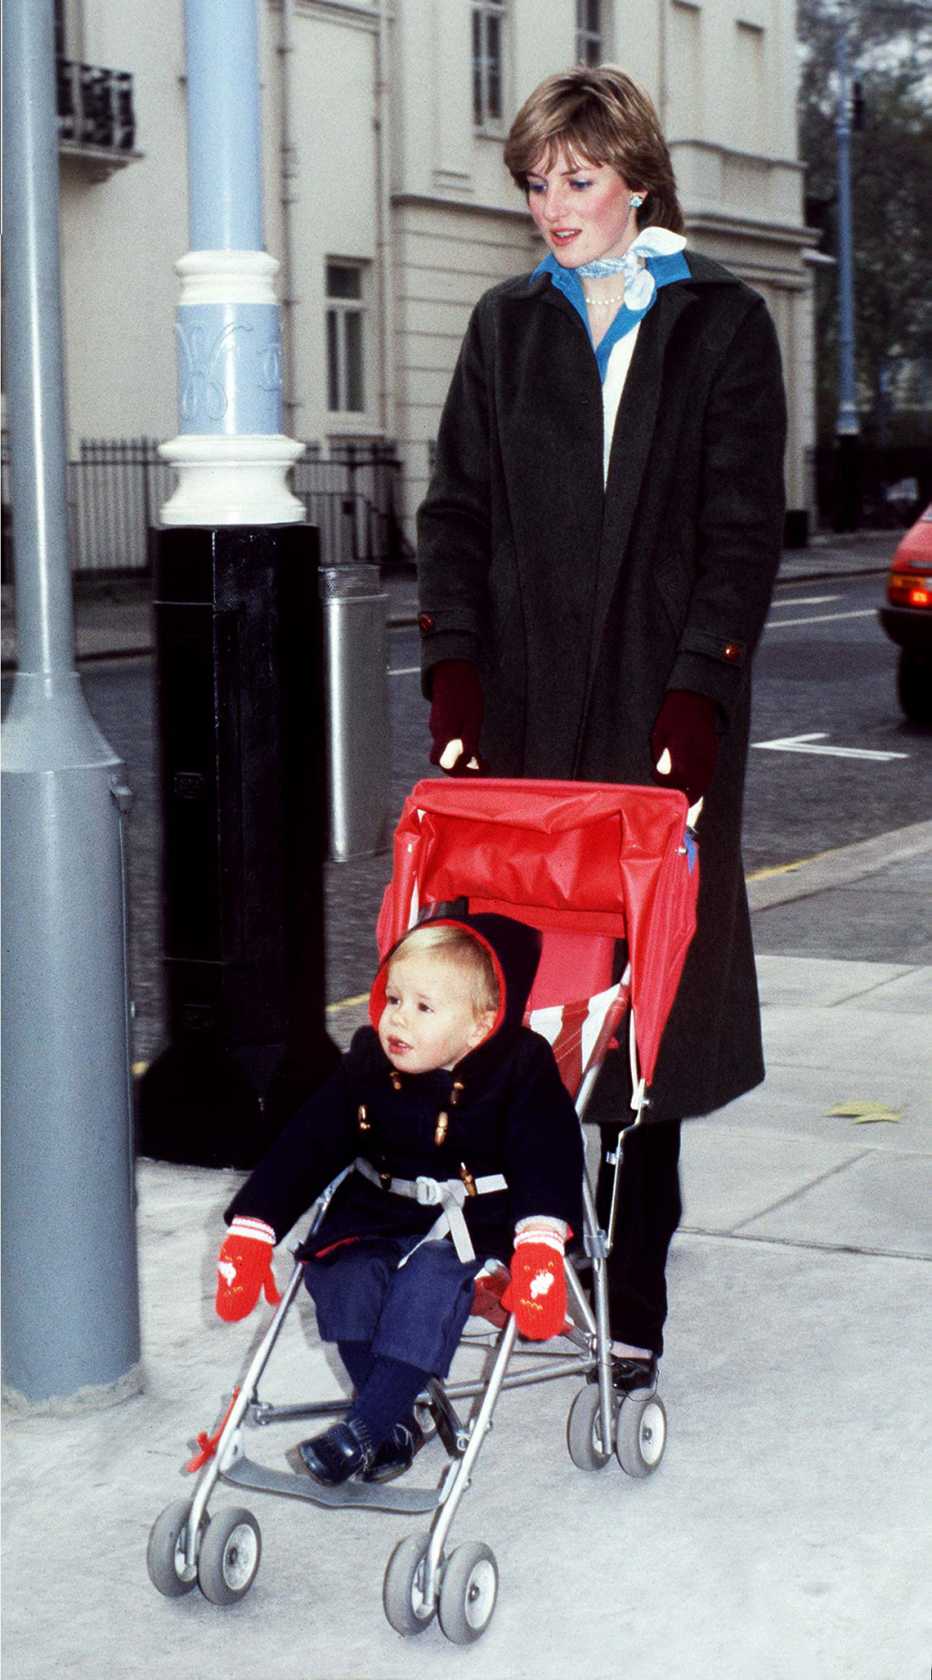 diana spencer when she was nanny to mary robertsons son patrick